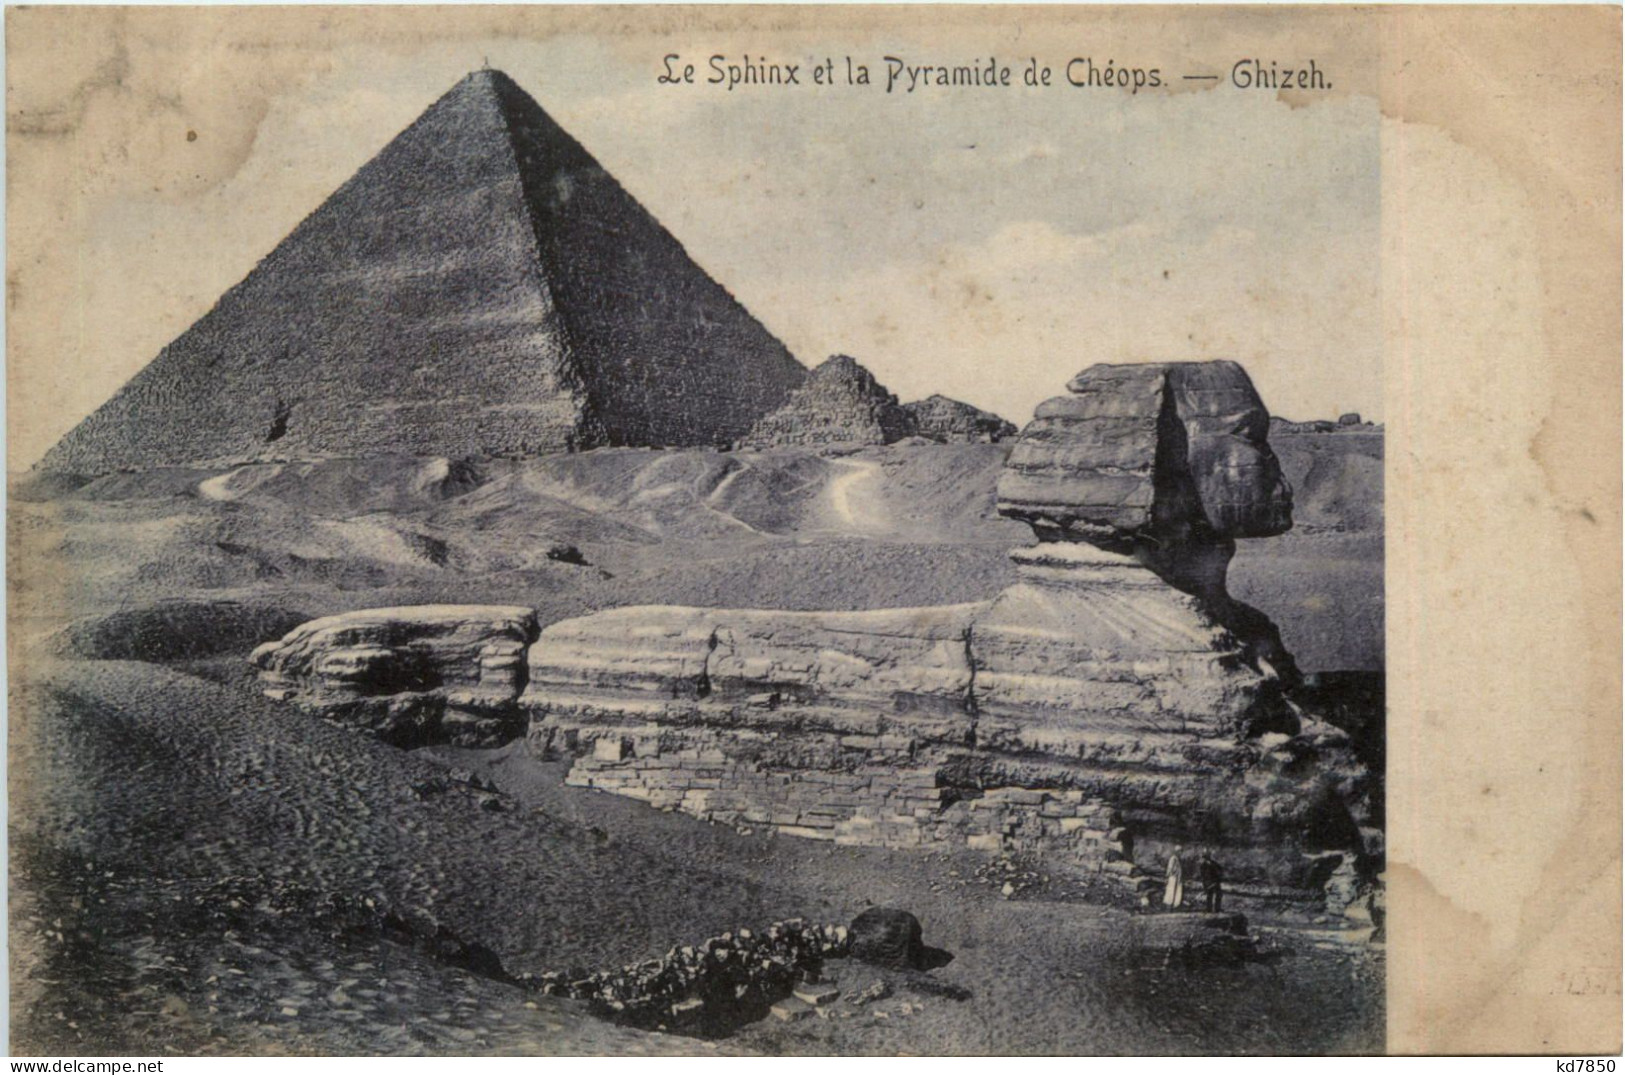 Ghizeh - Le Sphinx - Pyramides